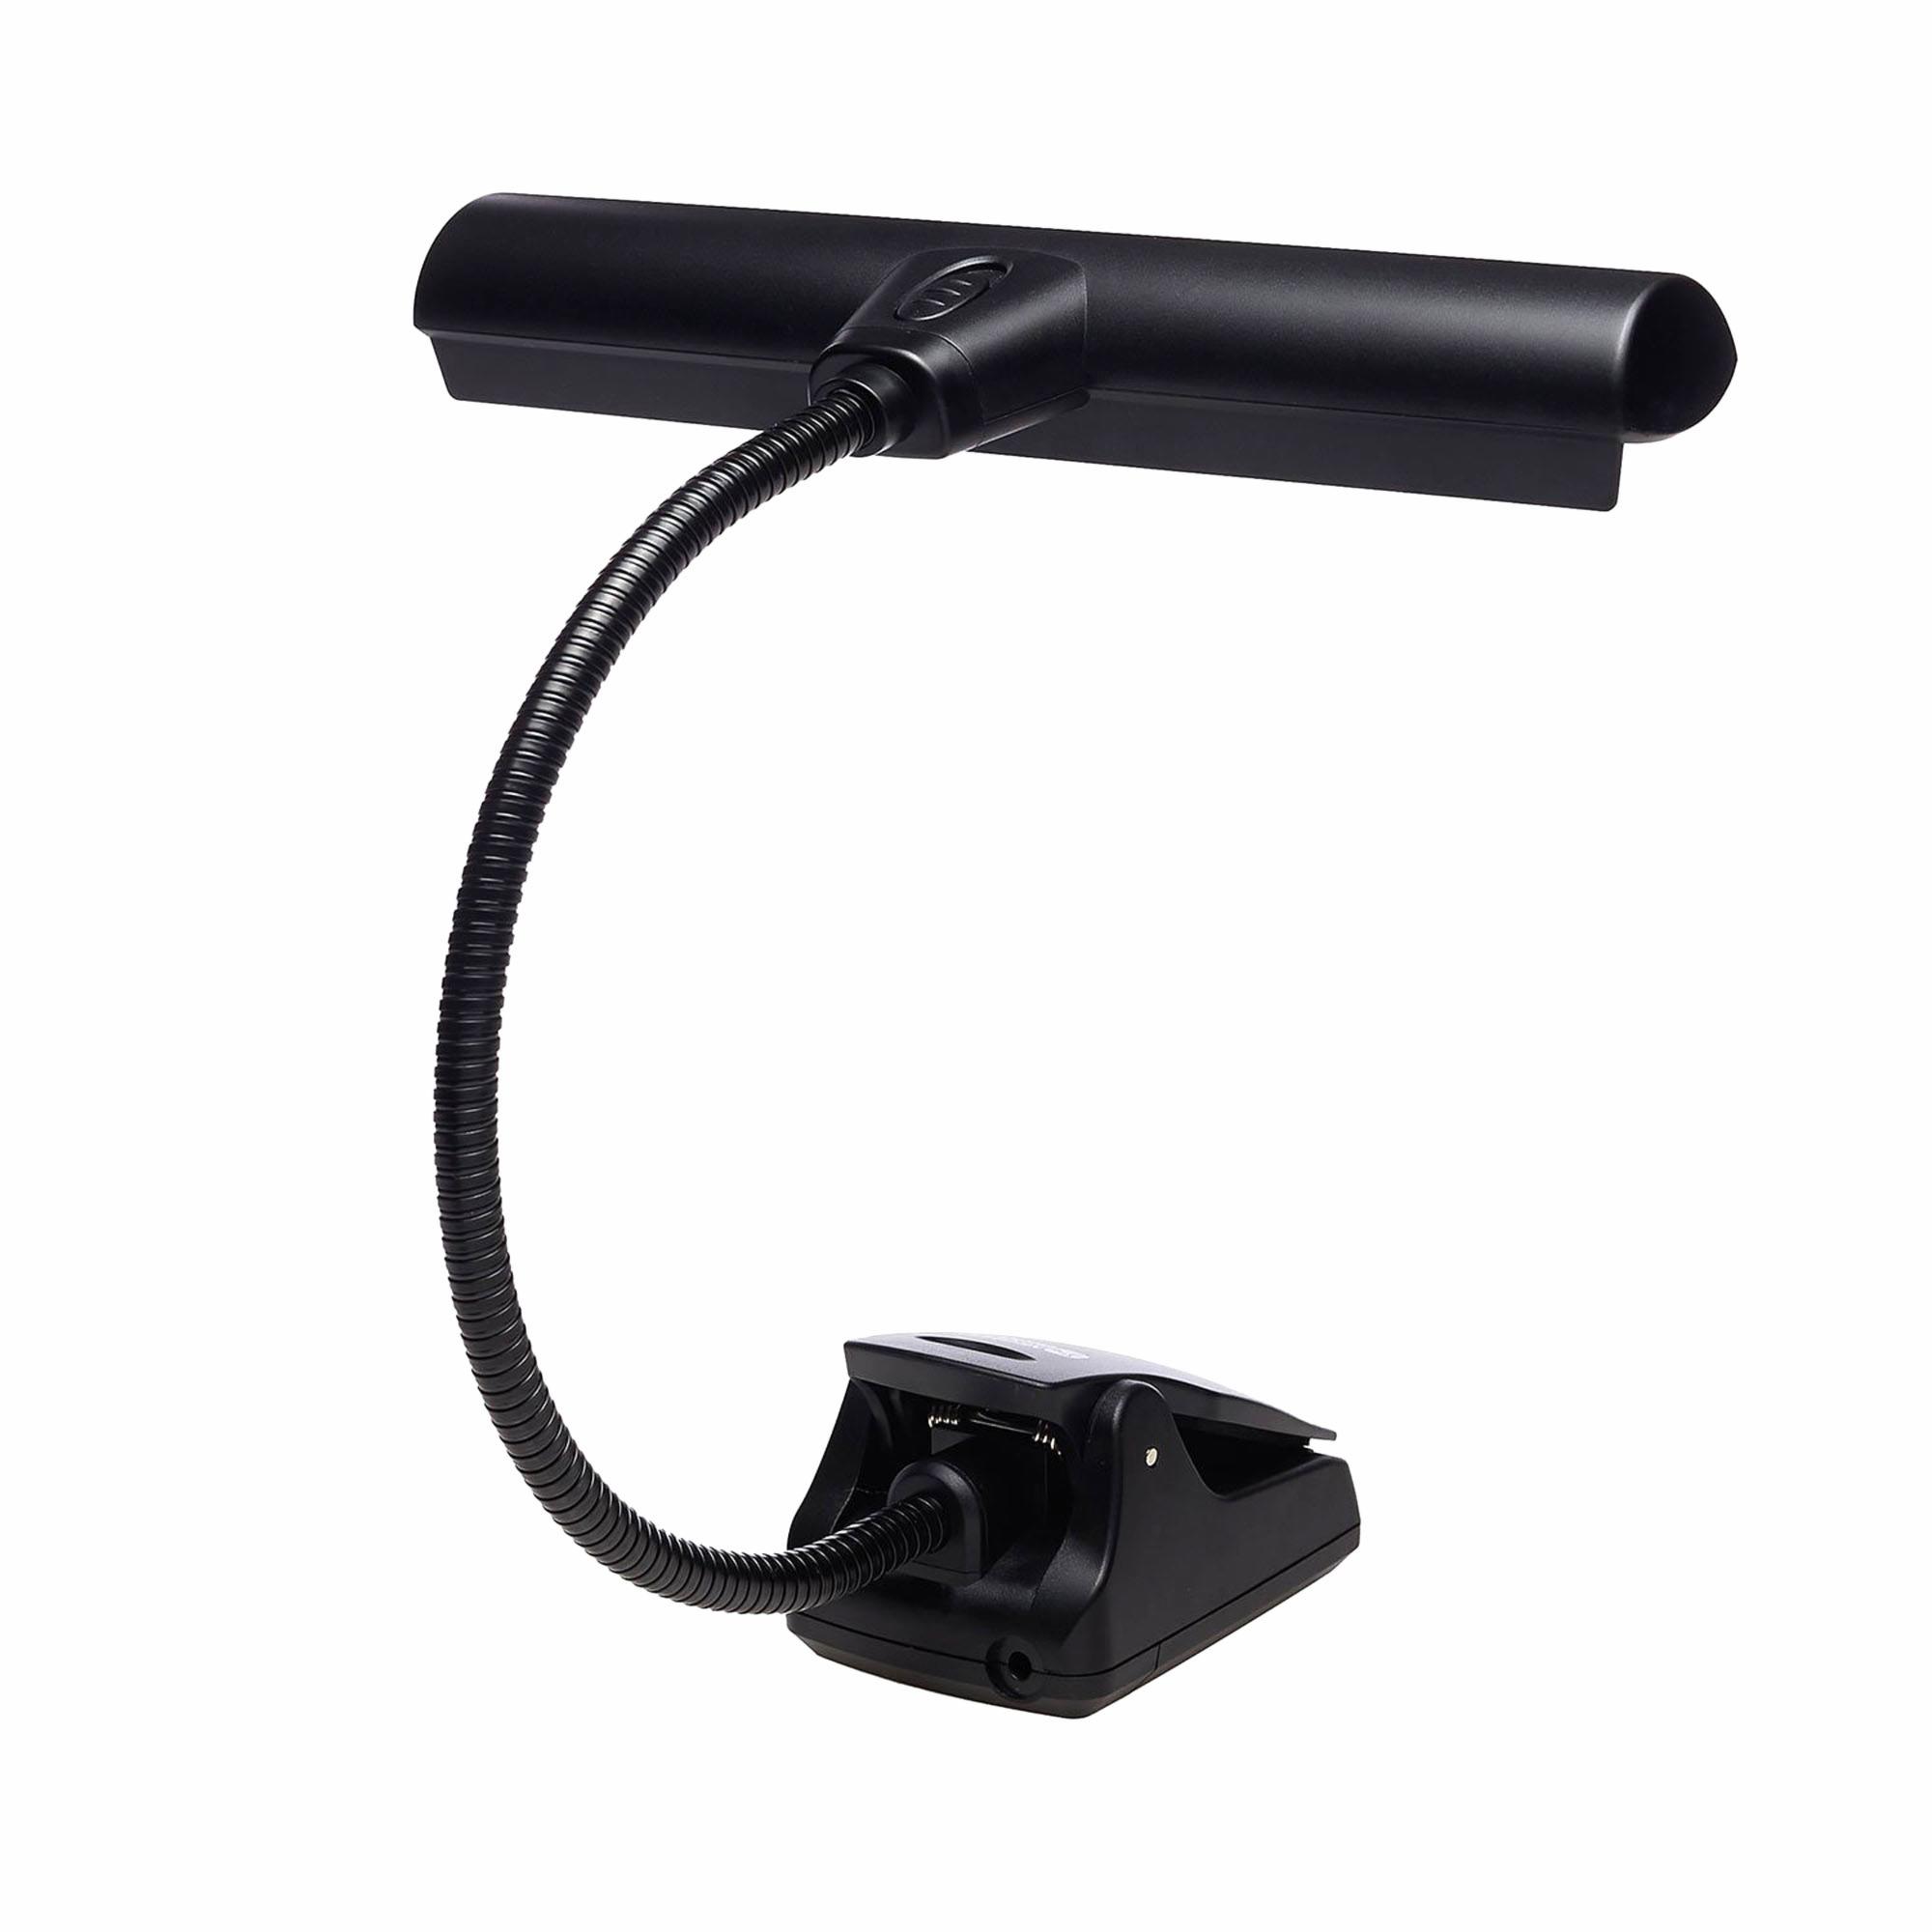 Mighty Bright Music Stand LED Orchestra Light